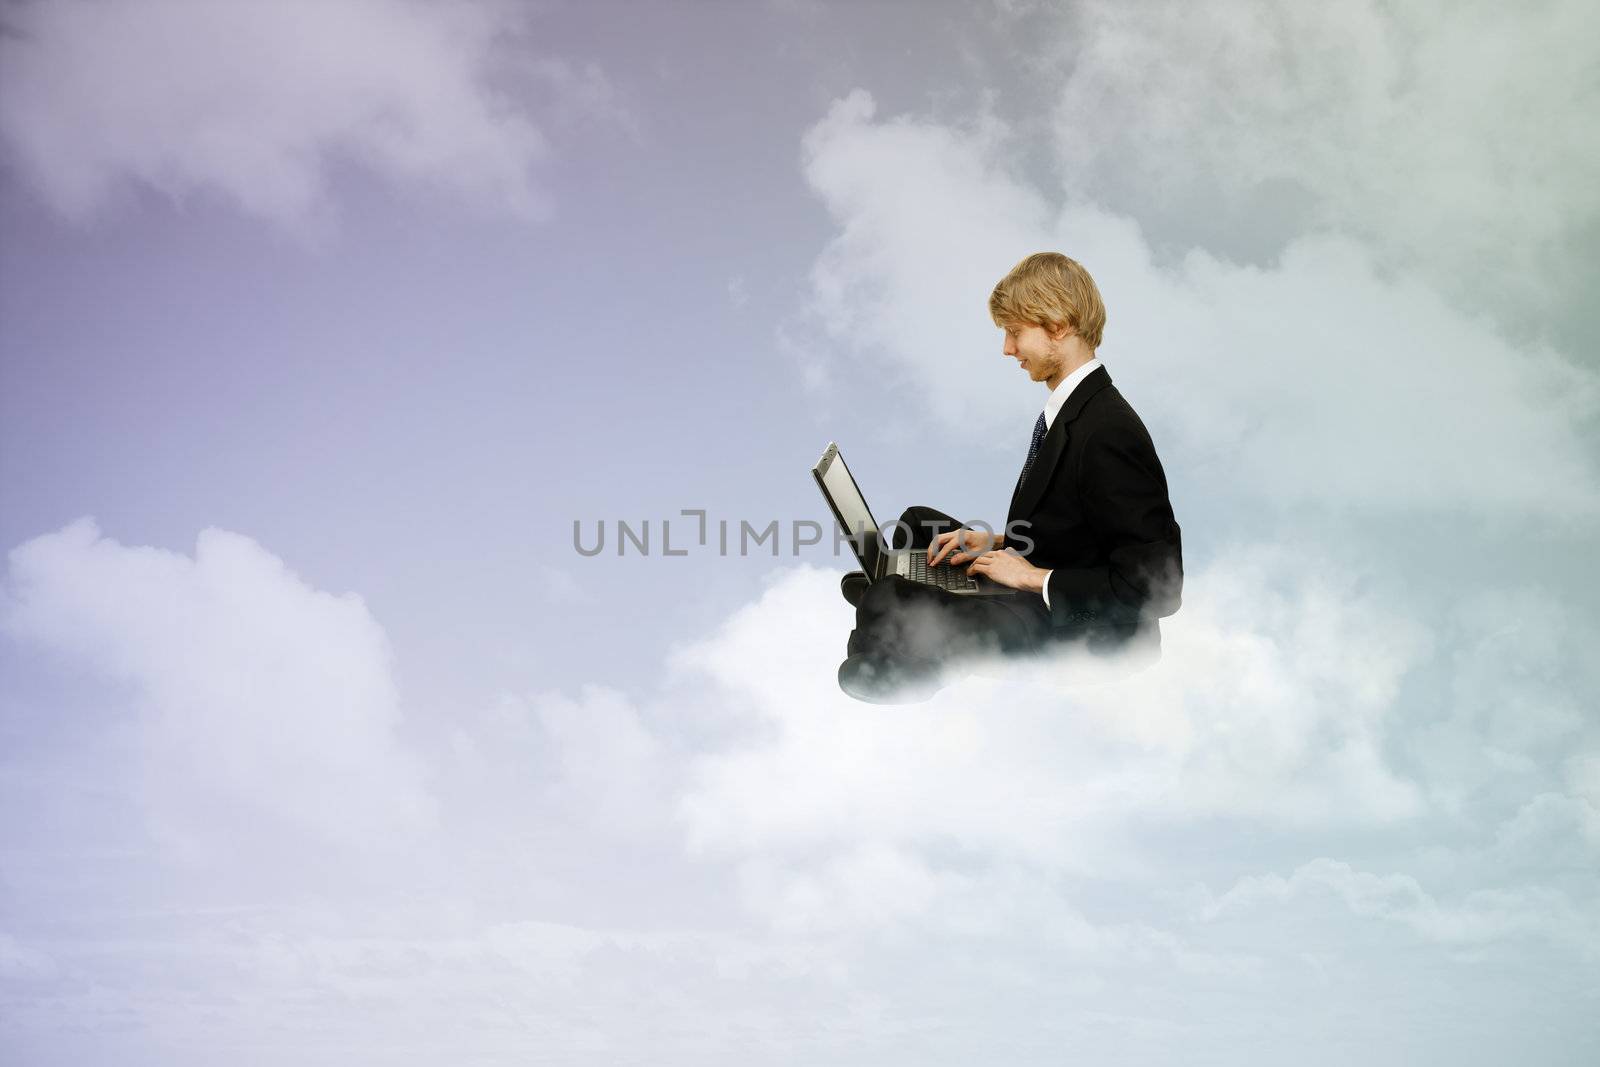 Using a laptop on clouds by melpomene